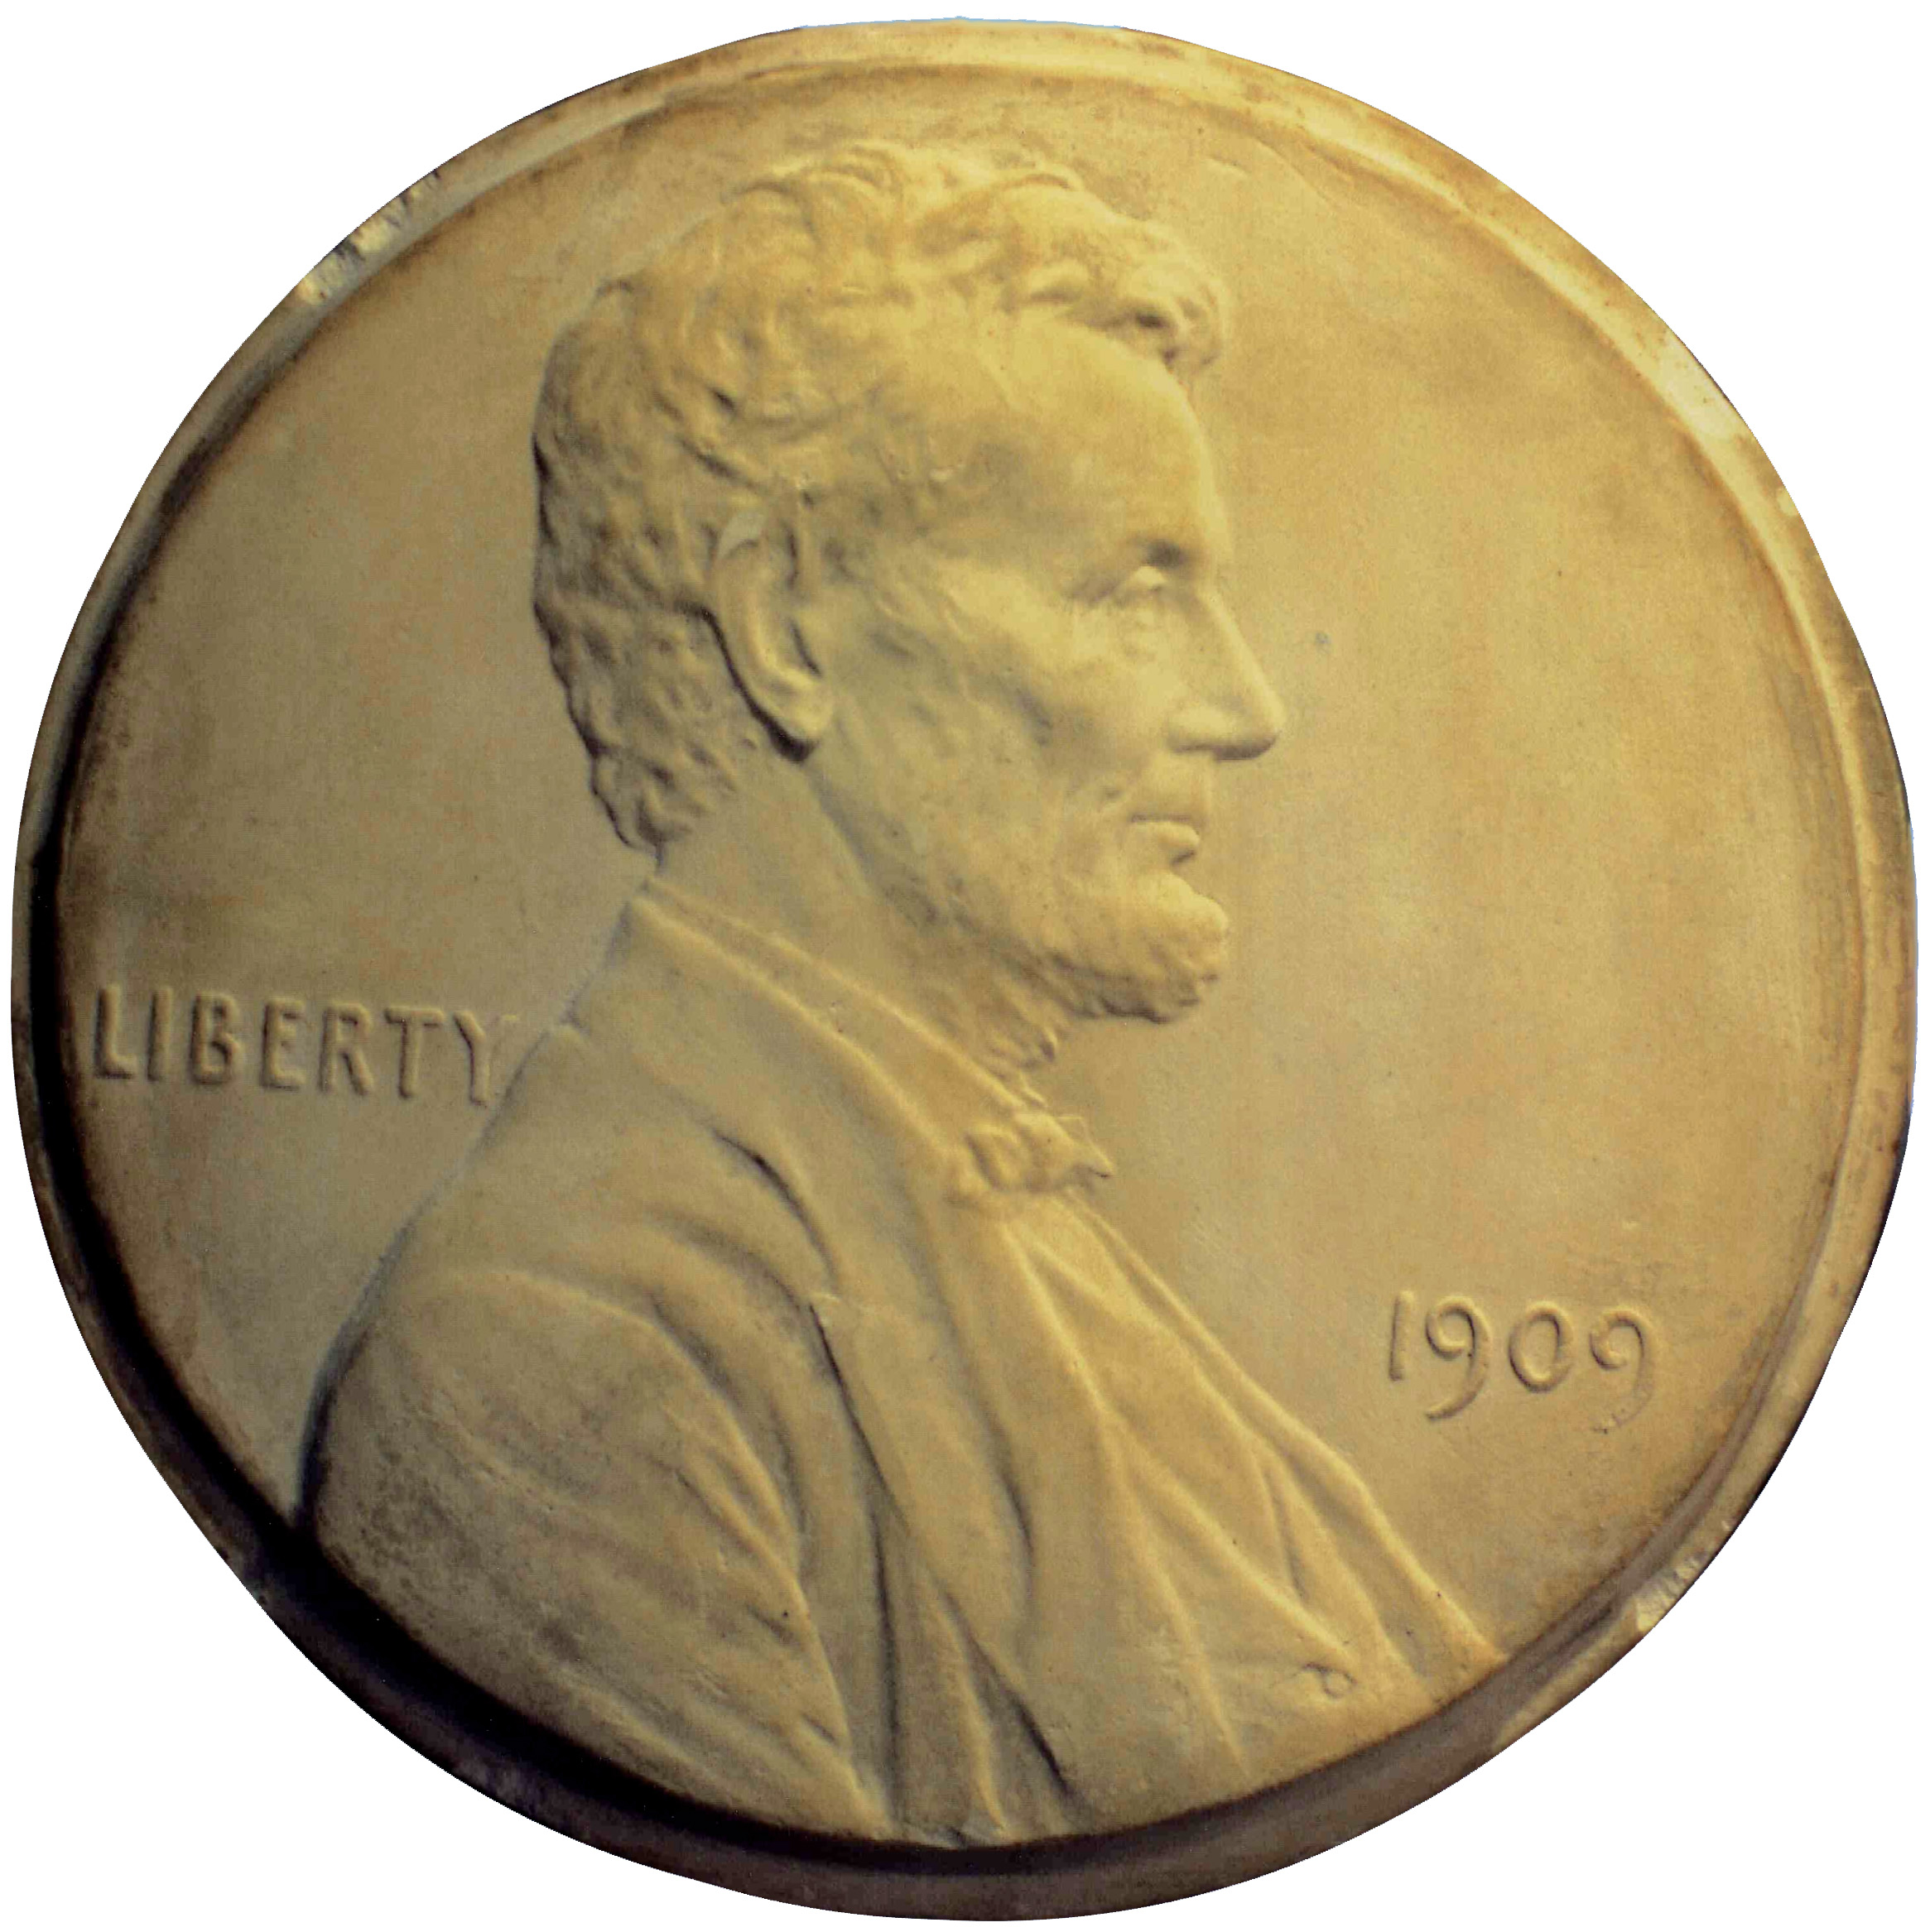 Hahlo-136, Lincoln cent